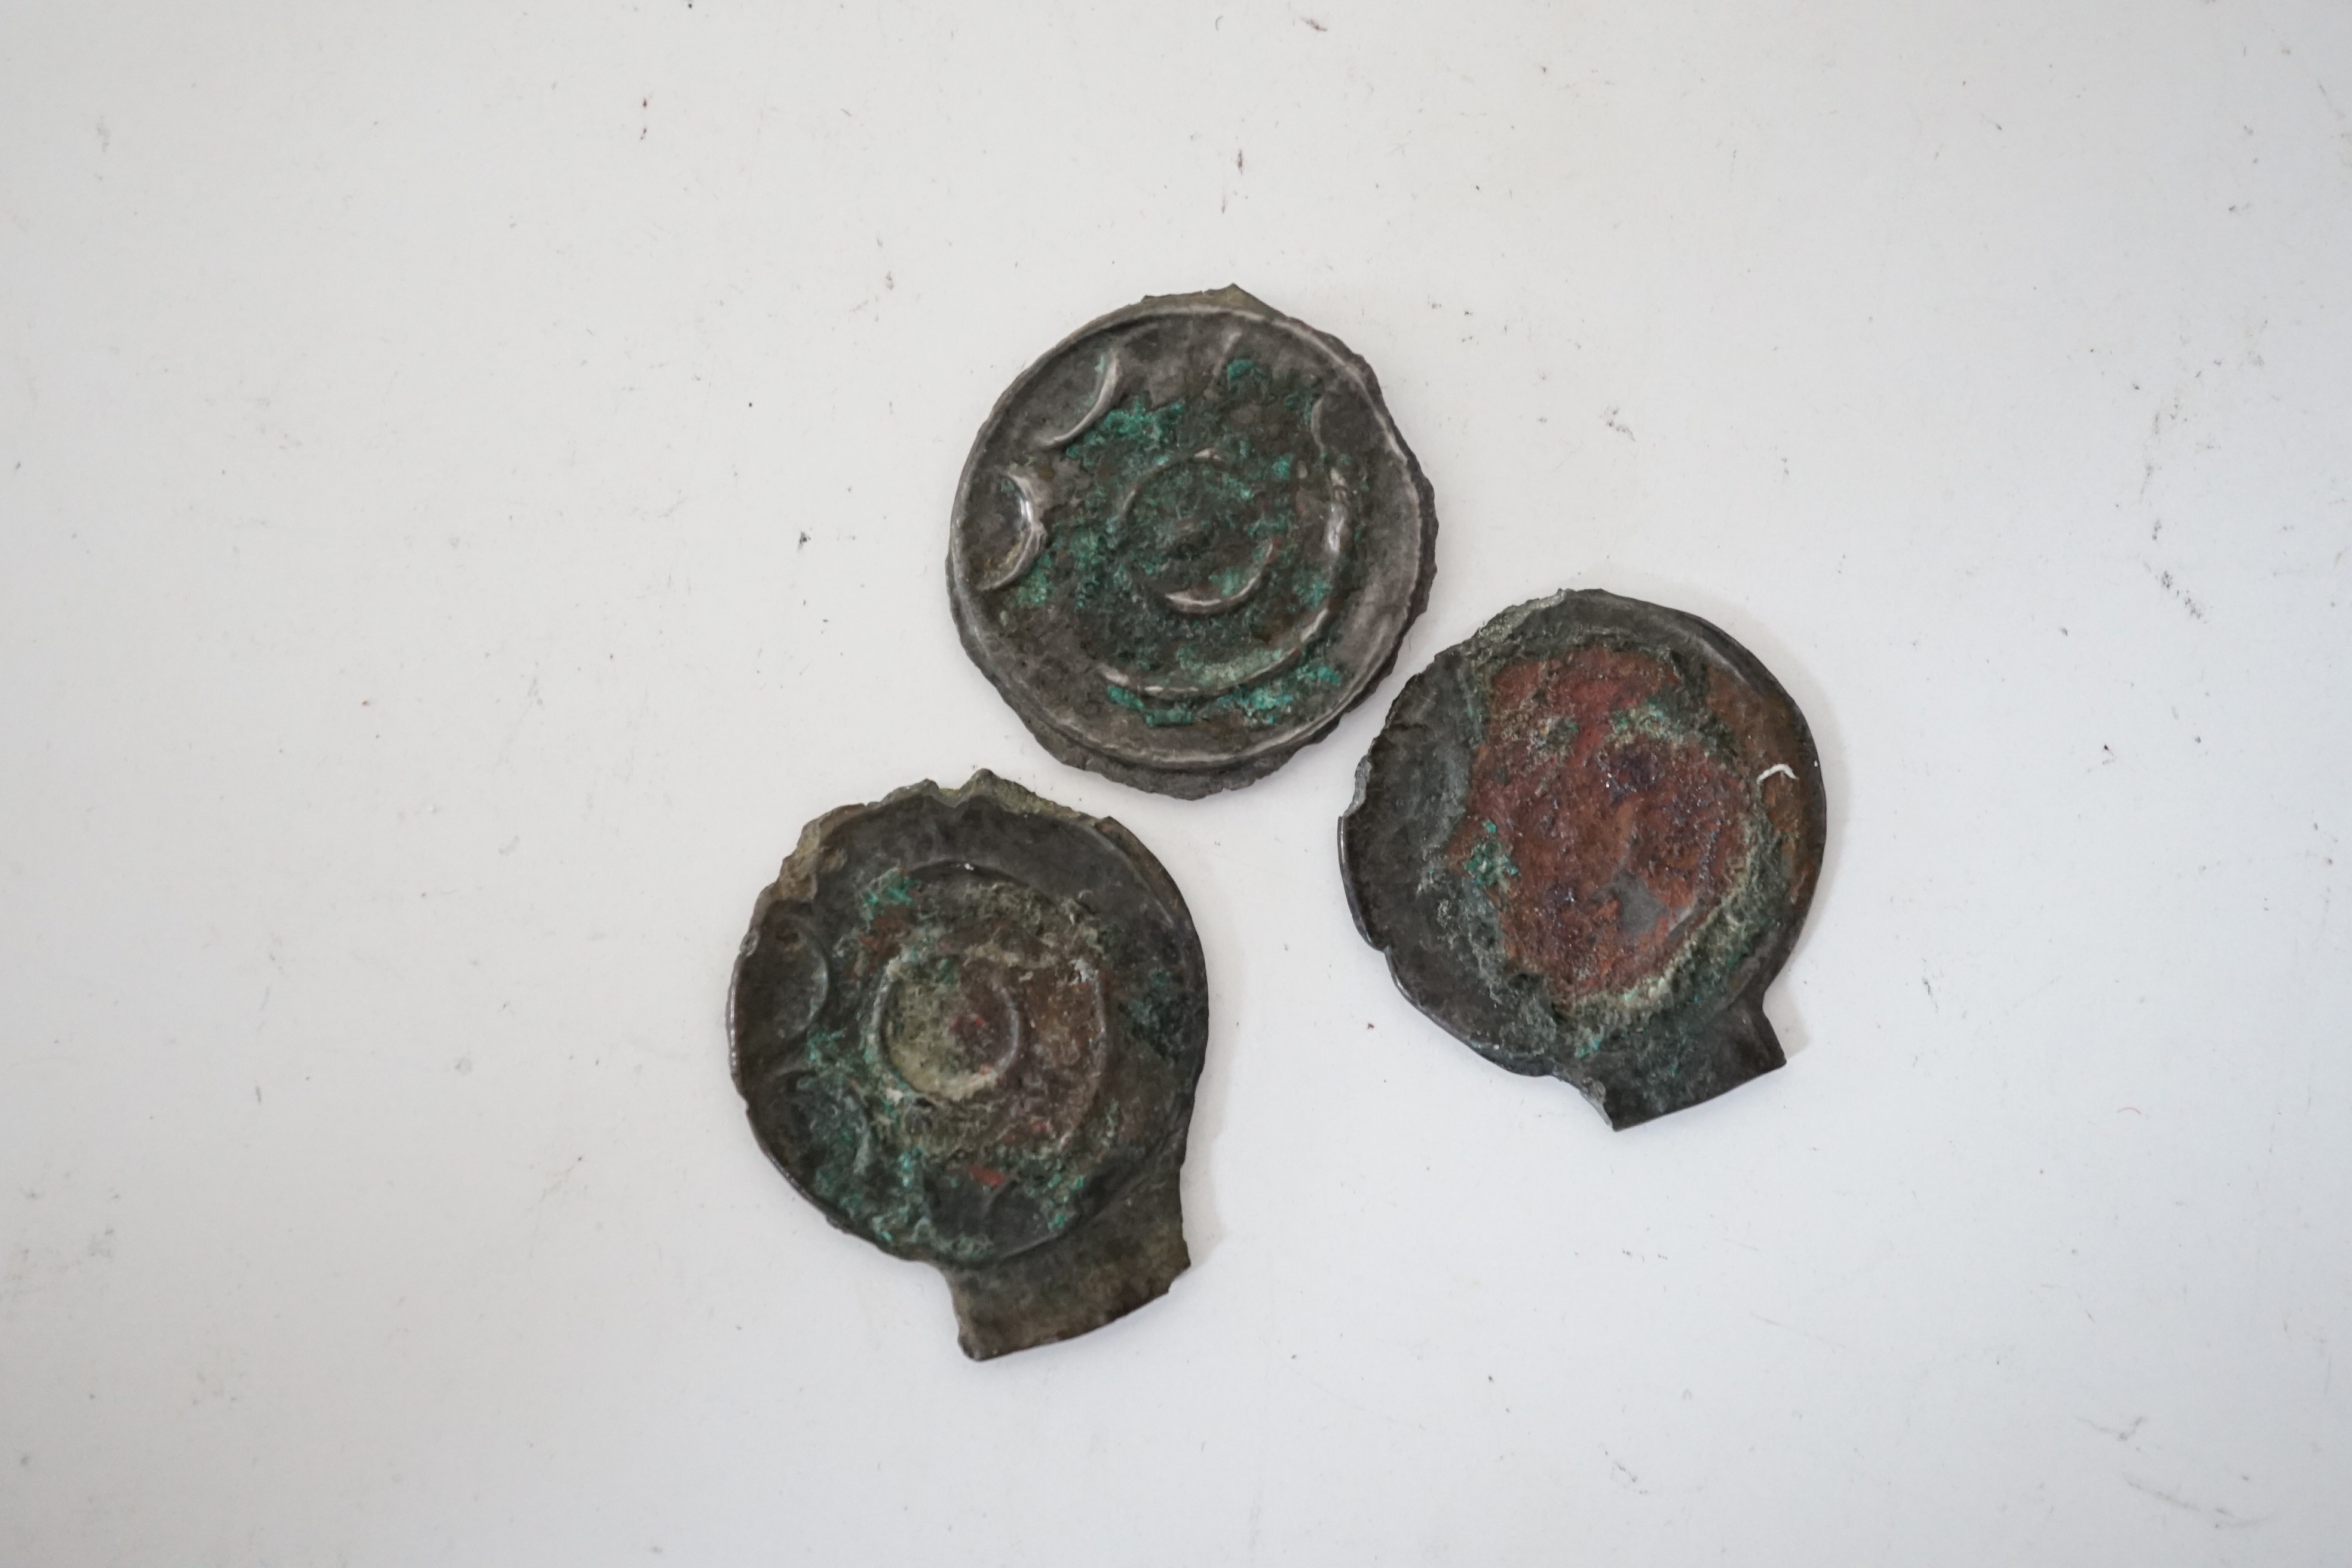 British Celtic coins, three copper/tin alloy potins (S63), stick bull and stick head designs, some encrustation otherwise VF, 1.16 to 1.6g, with label stating that they were found in Warlingham, Surrey